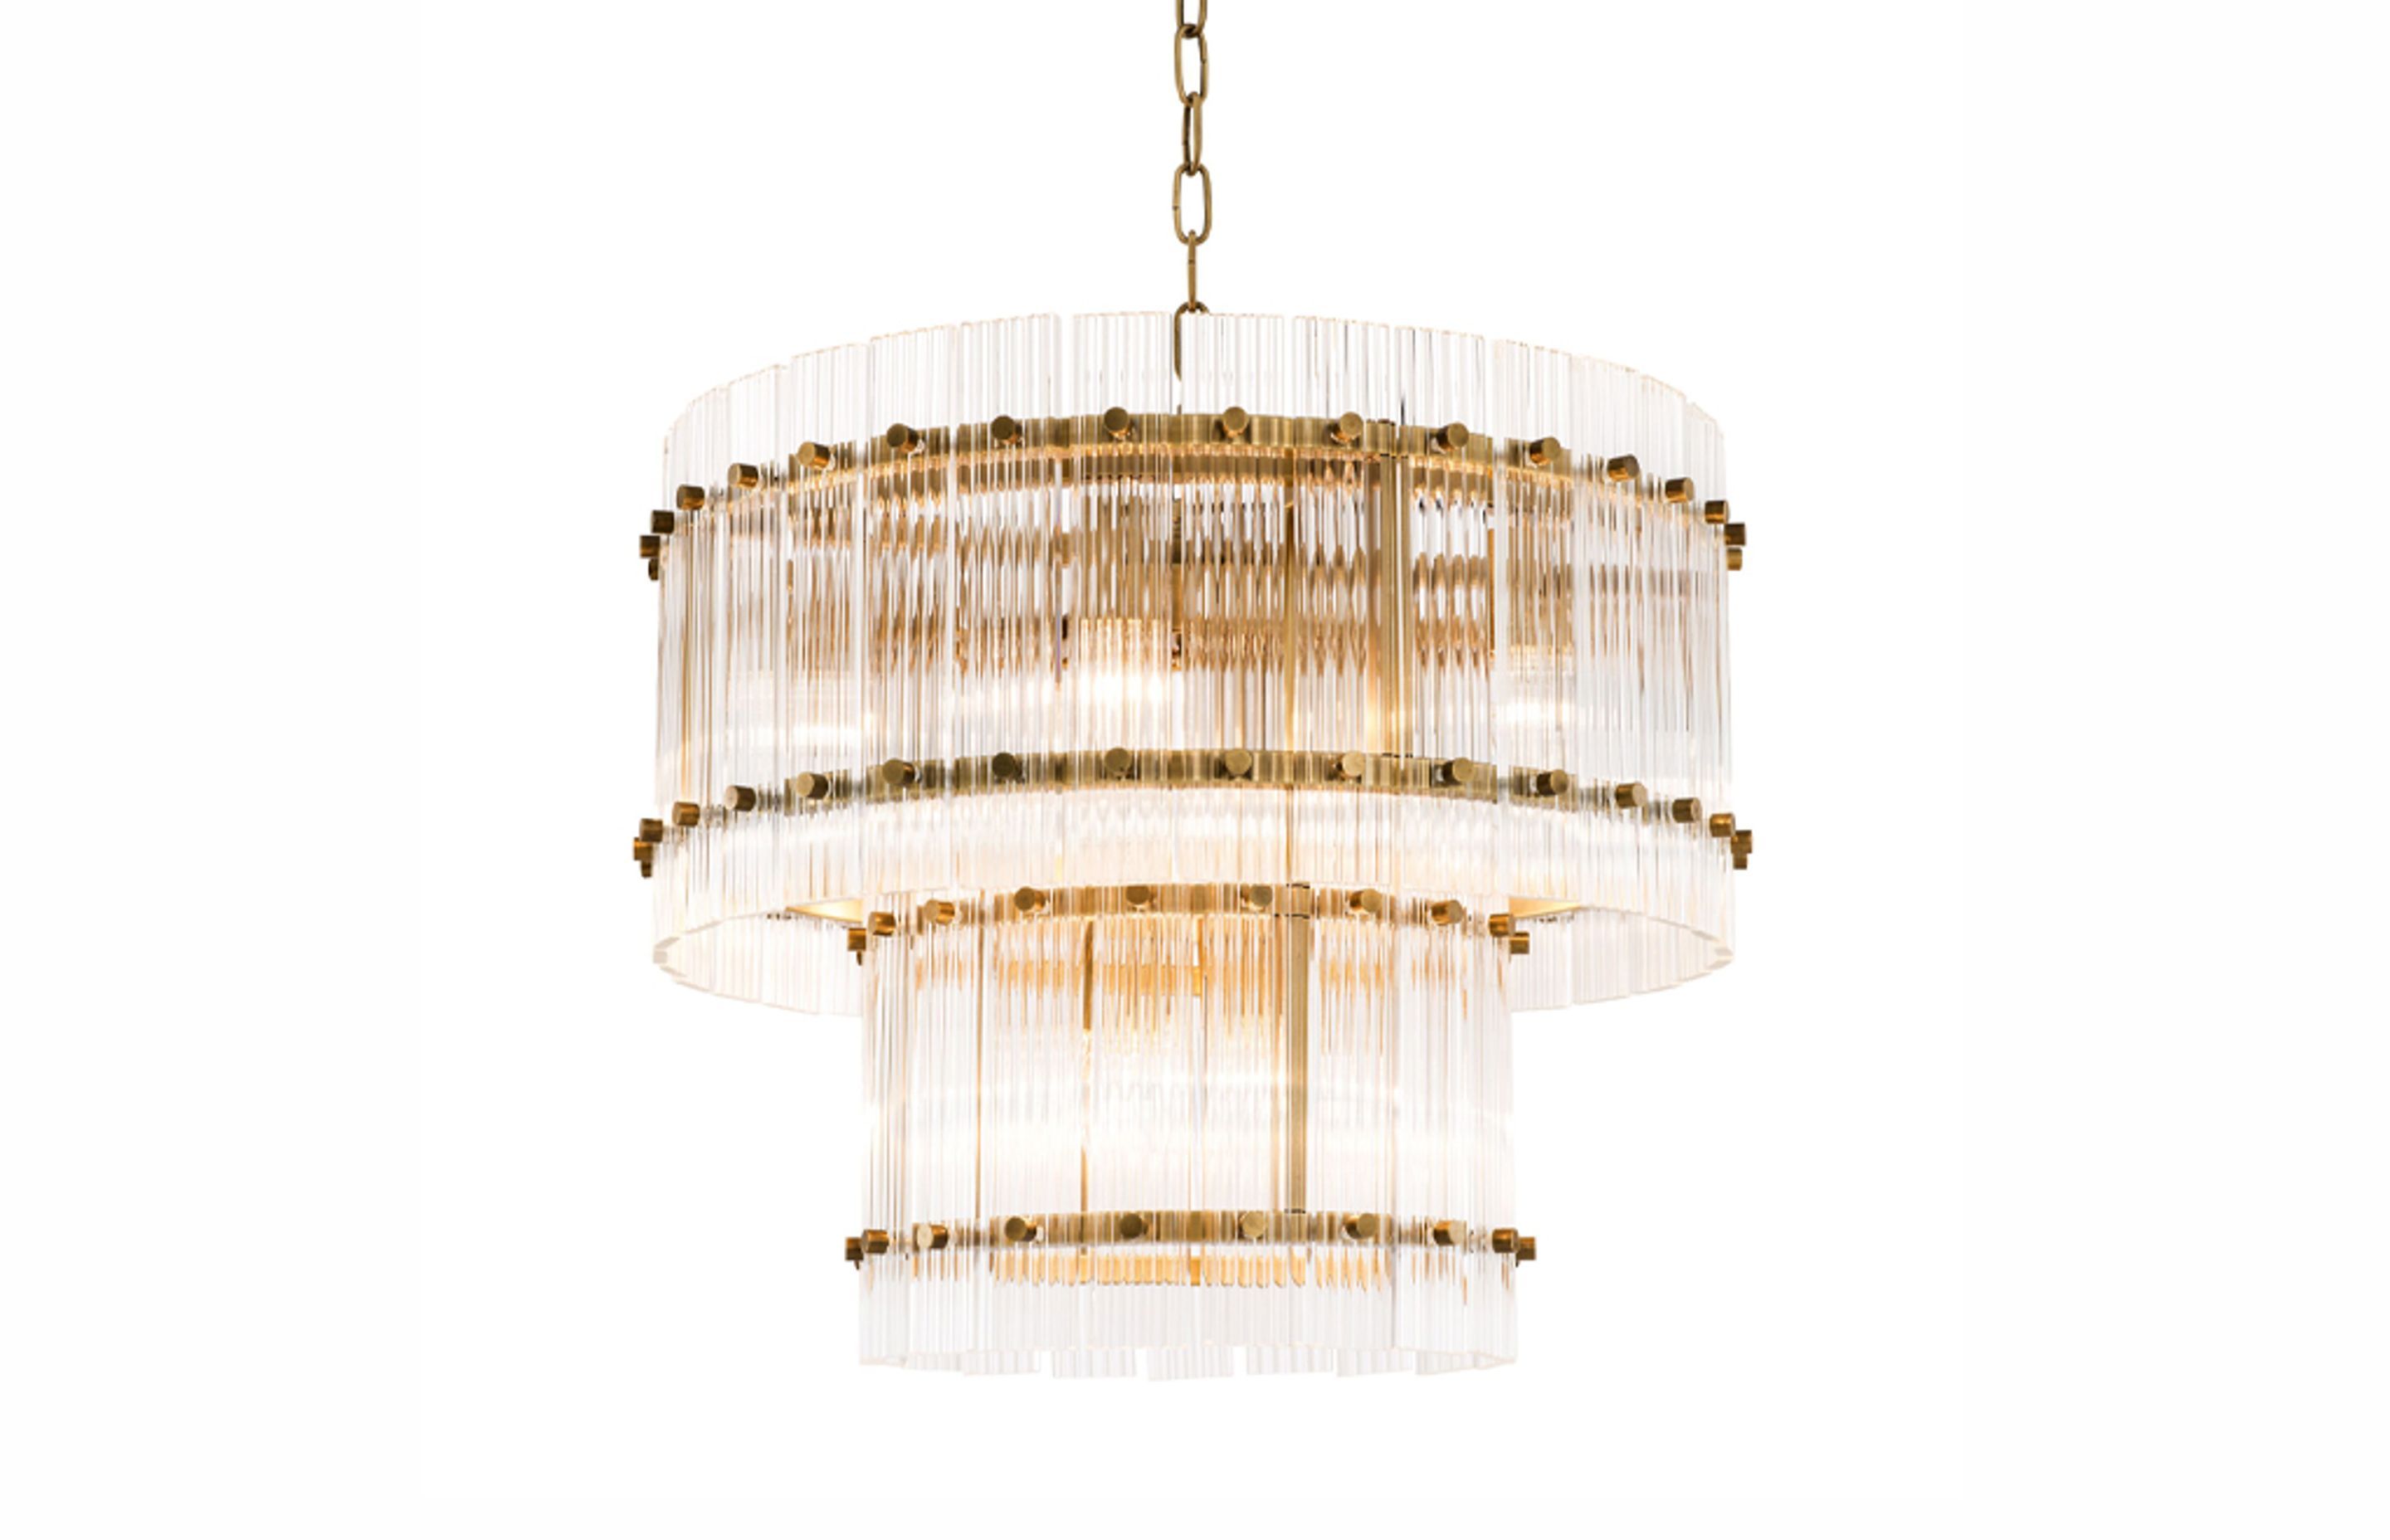 Fluted glass lighting like the Ruby chandelier from TRENZSEATER can add a stunning Art Deco-style feature in your interiors,